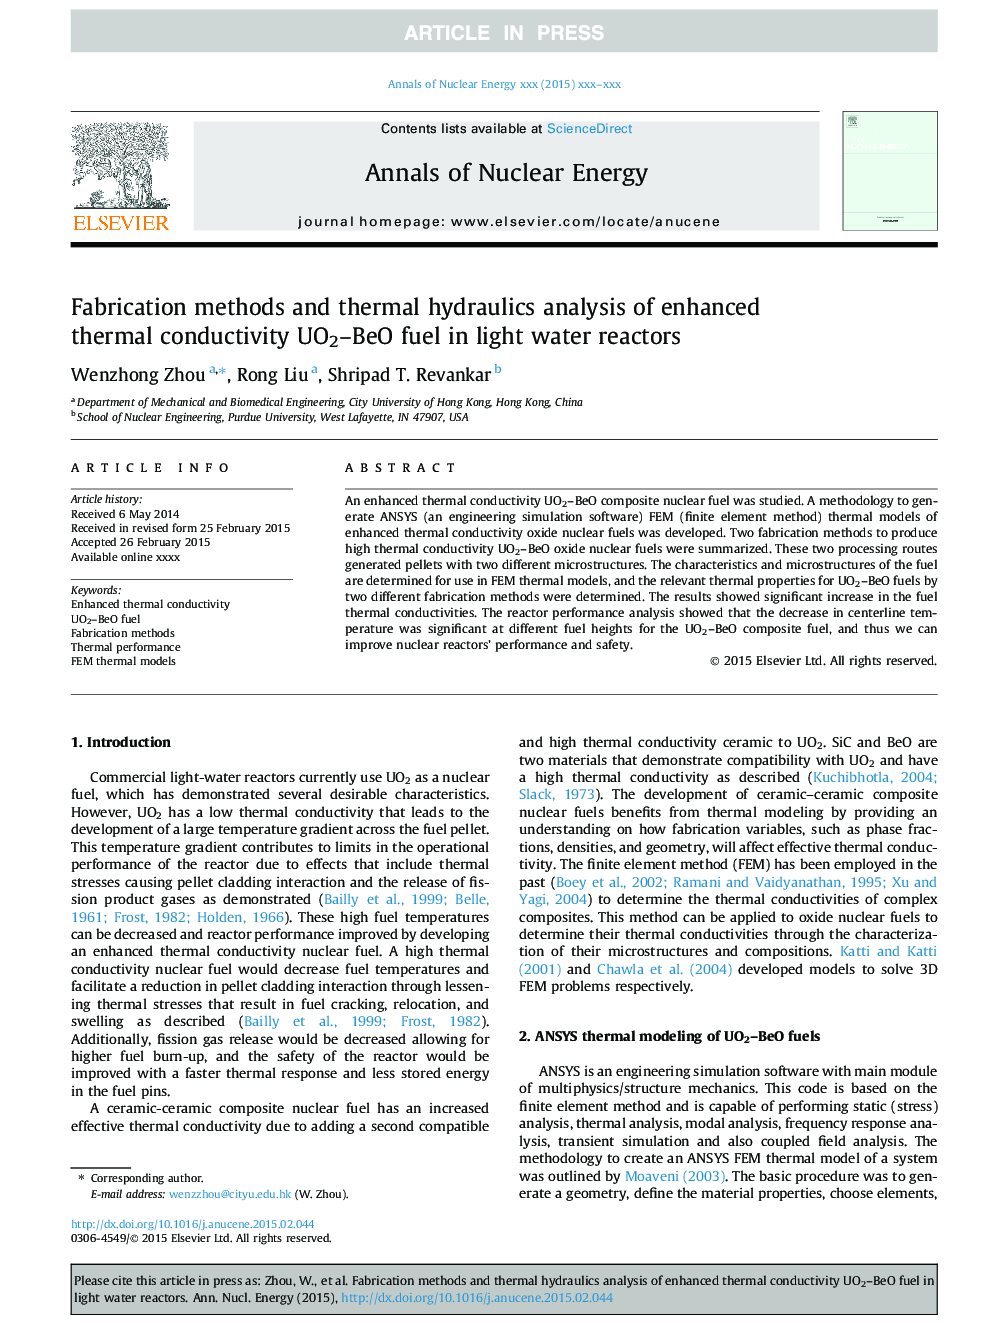 Fabrication methods and thermal hydraulics analysis of enhanced thermal conductivity UO2-BeO fuel in light water reactors